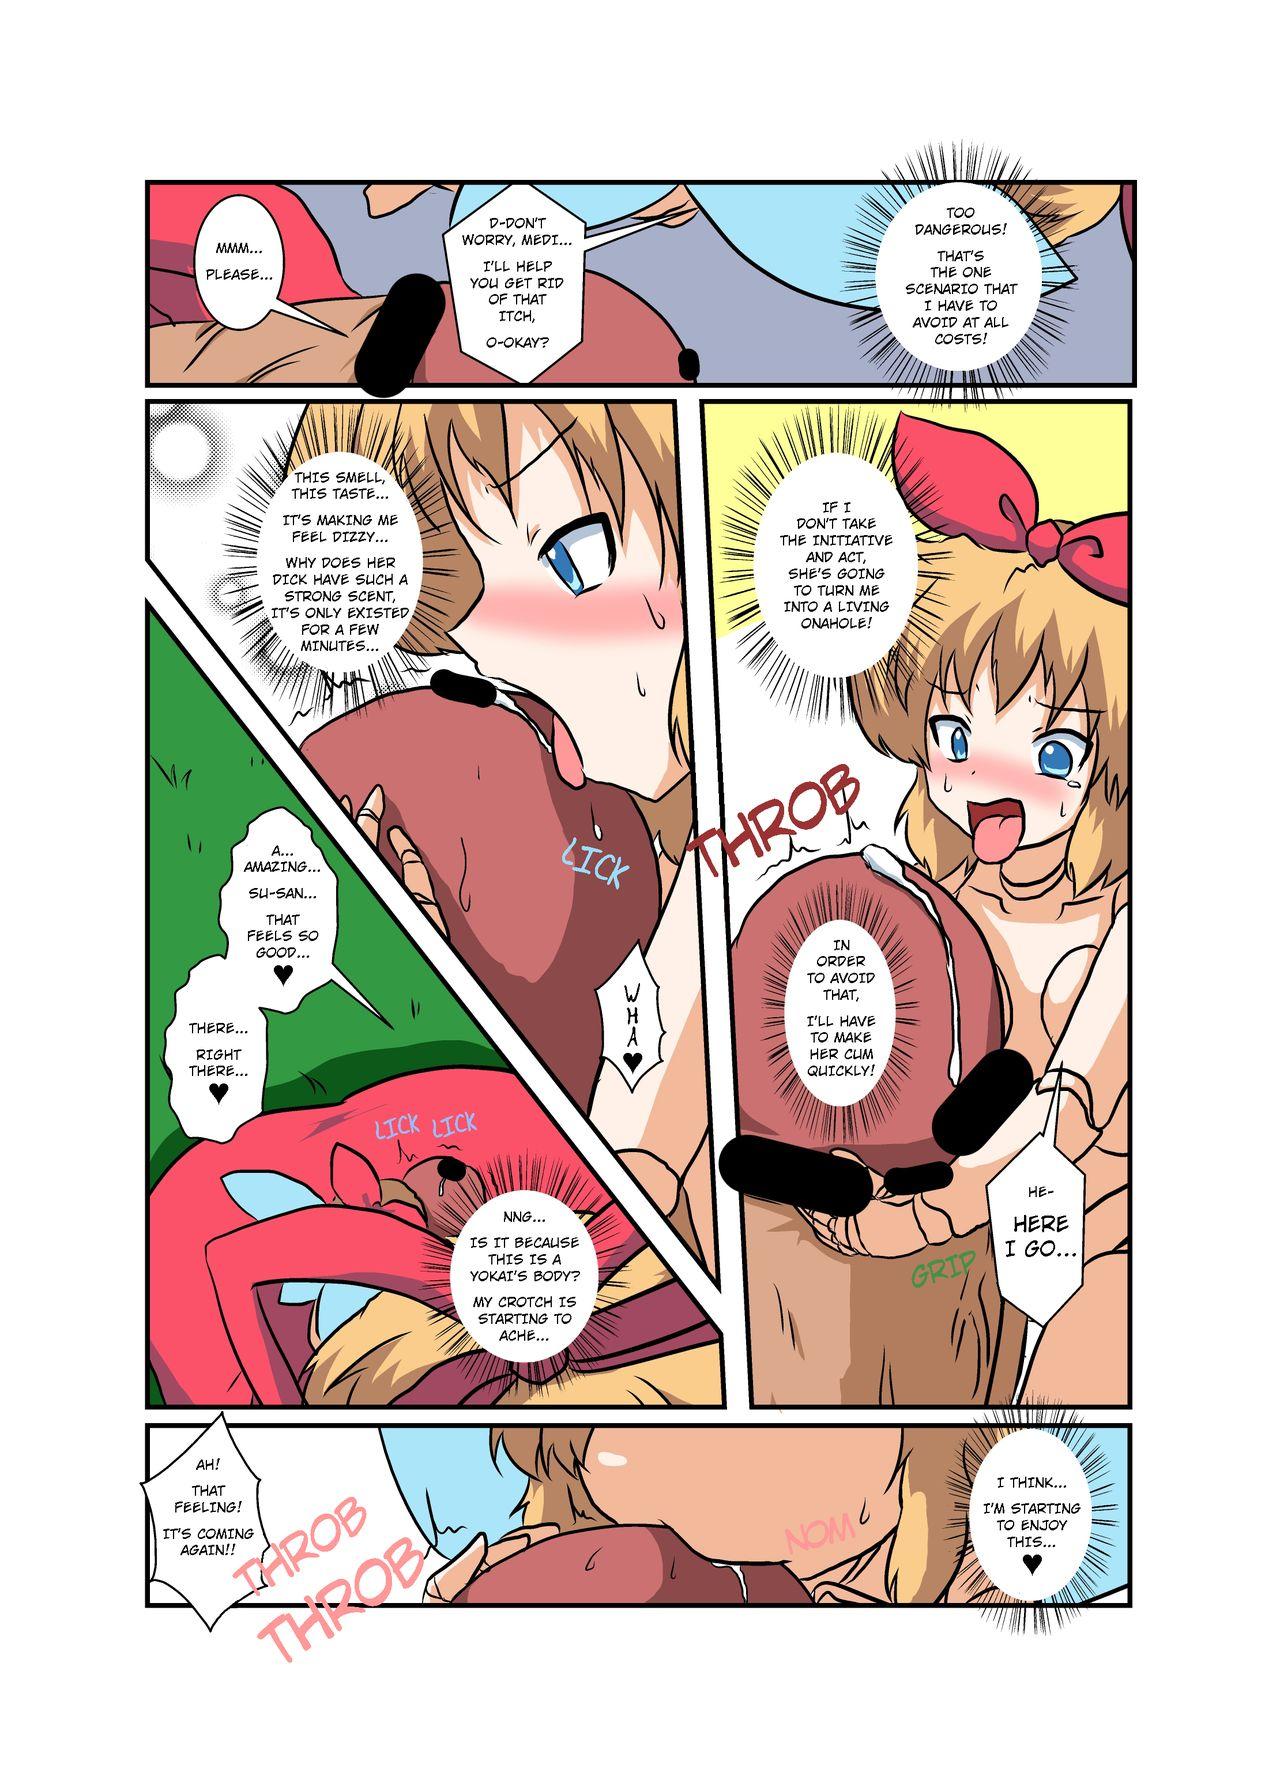 Handsome Touhou TS monogatari - Touhou project Trimmed - Page 13